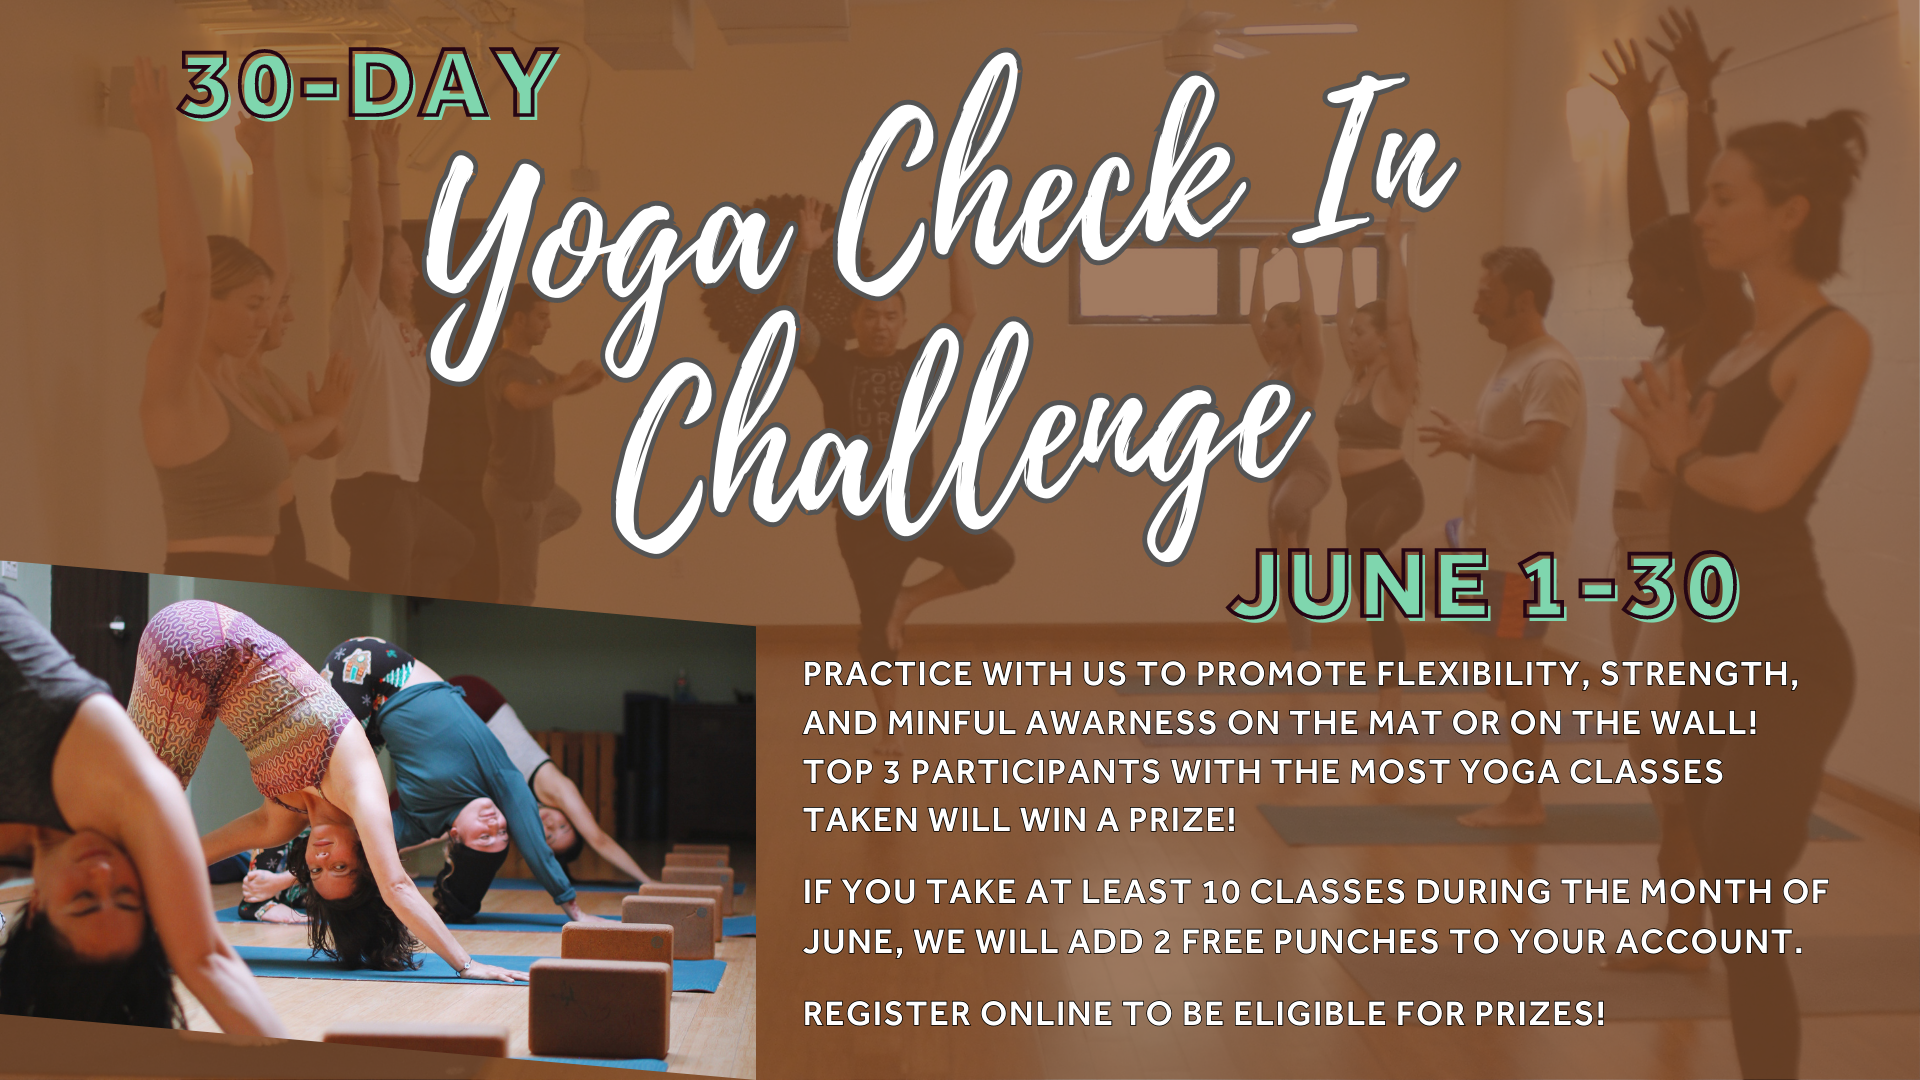 Yoga Check in Challenge